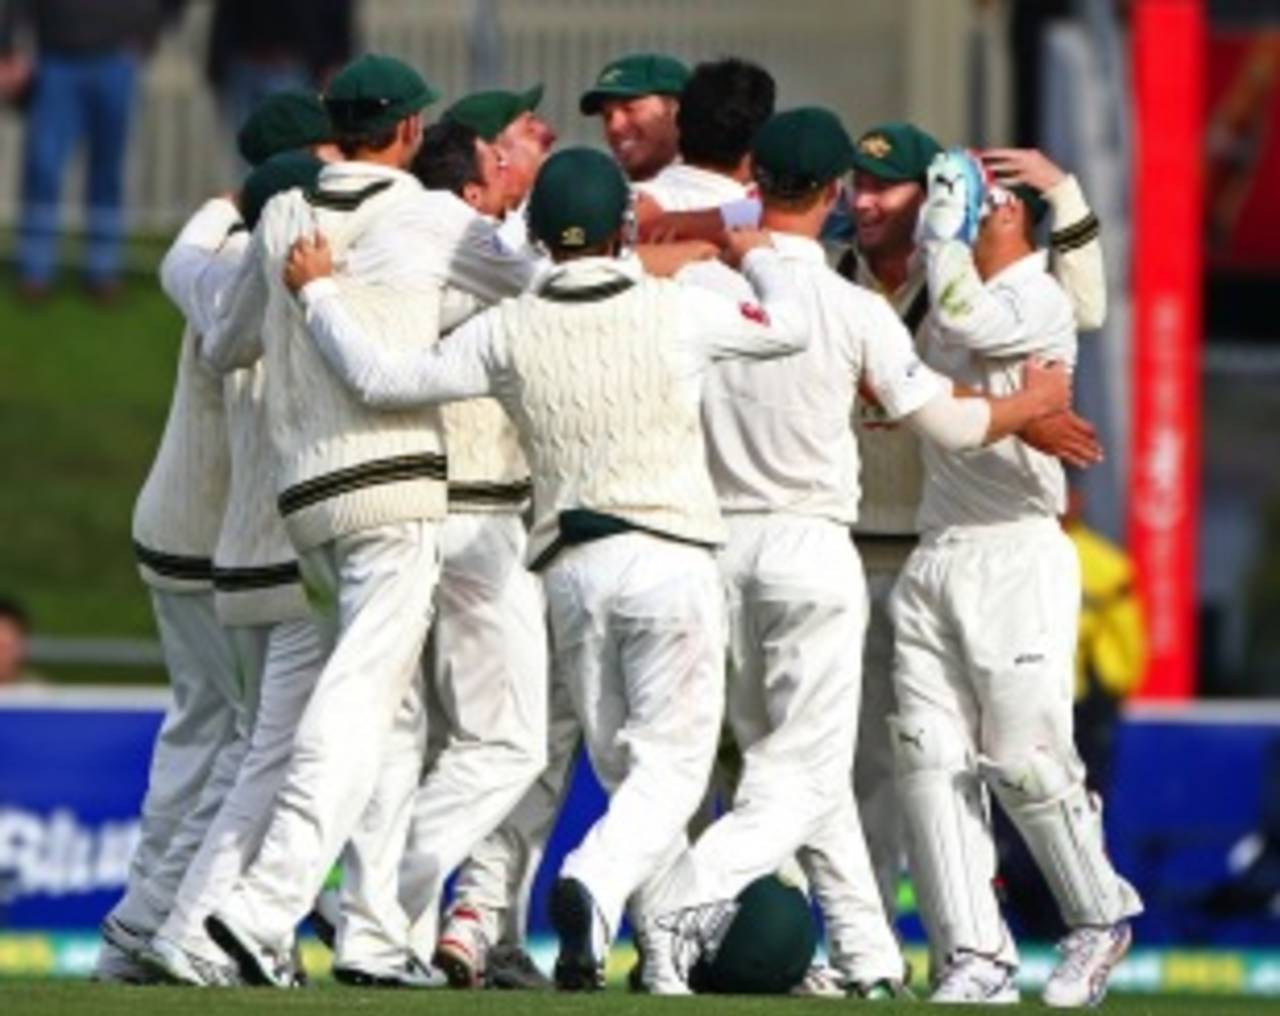 As the team converged in a joyous huddle, the substitute Jordan Silk and the hamstrung captain among them, they had the memory of Wade's over to remind them of how far they had come&nbsp;&nbsp;&bull;&nbsp;&nbsp;Associated Press